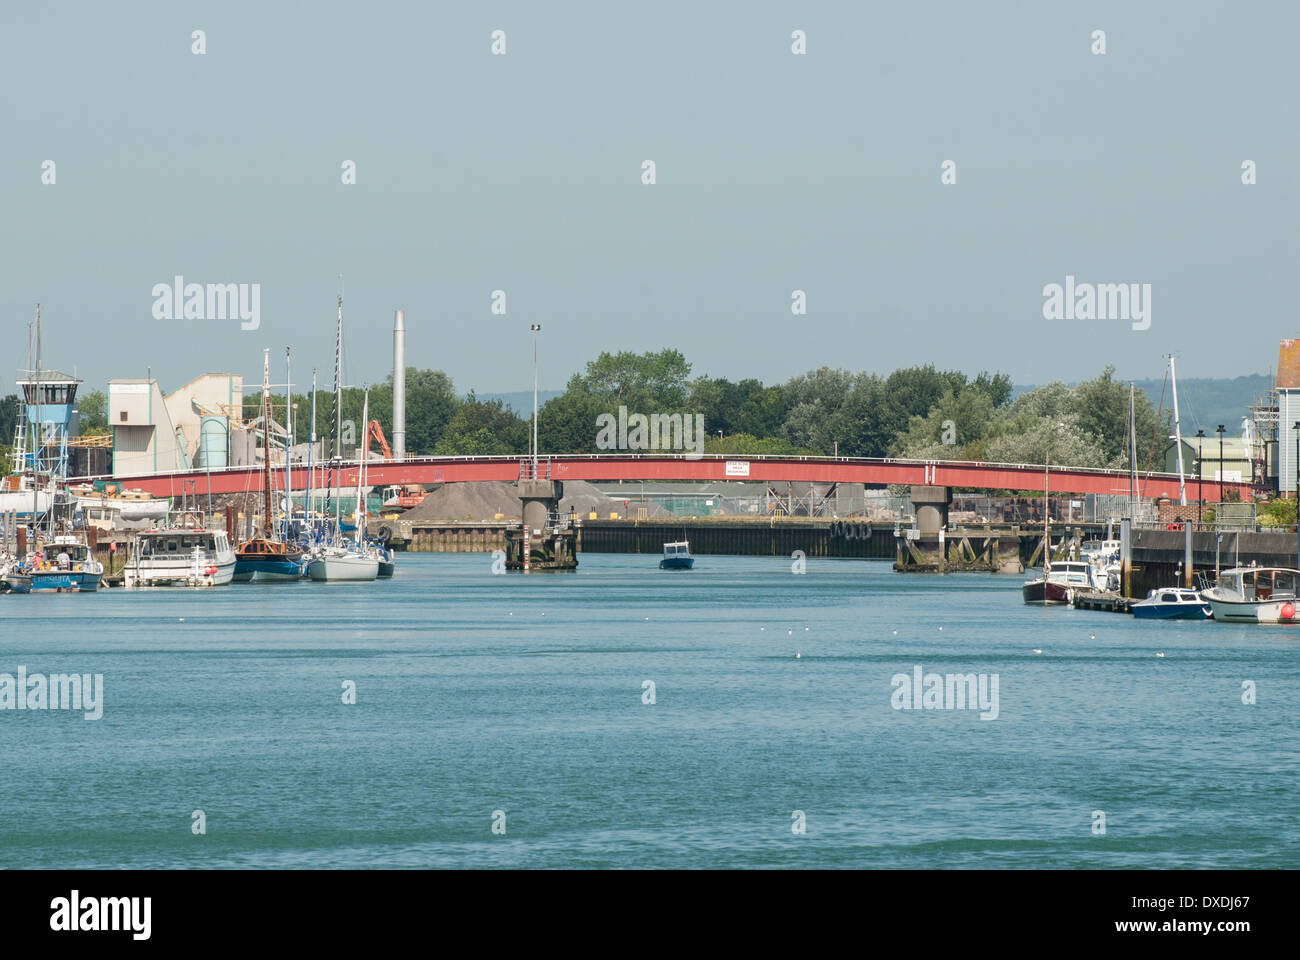 The River Arun and retractable footbridge at Littlehampton in West Sussex on the south coast of England. Stock Photo